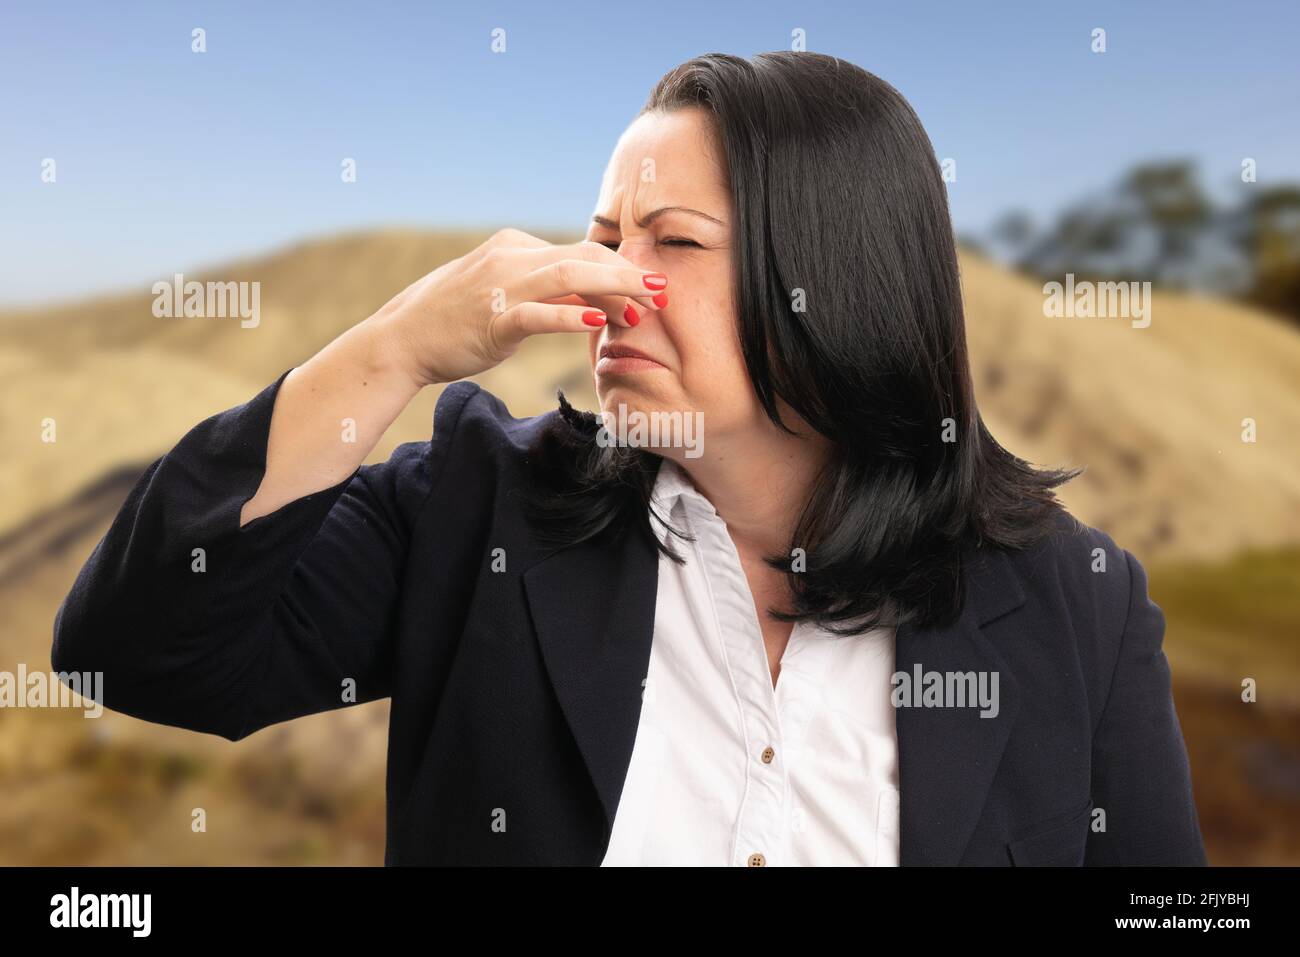 Female entrepreneur businesswoman wearing suit at construction site making bad smell gesture holding nose gross expression Stock Photo